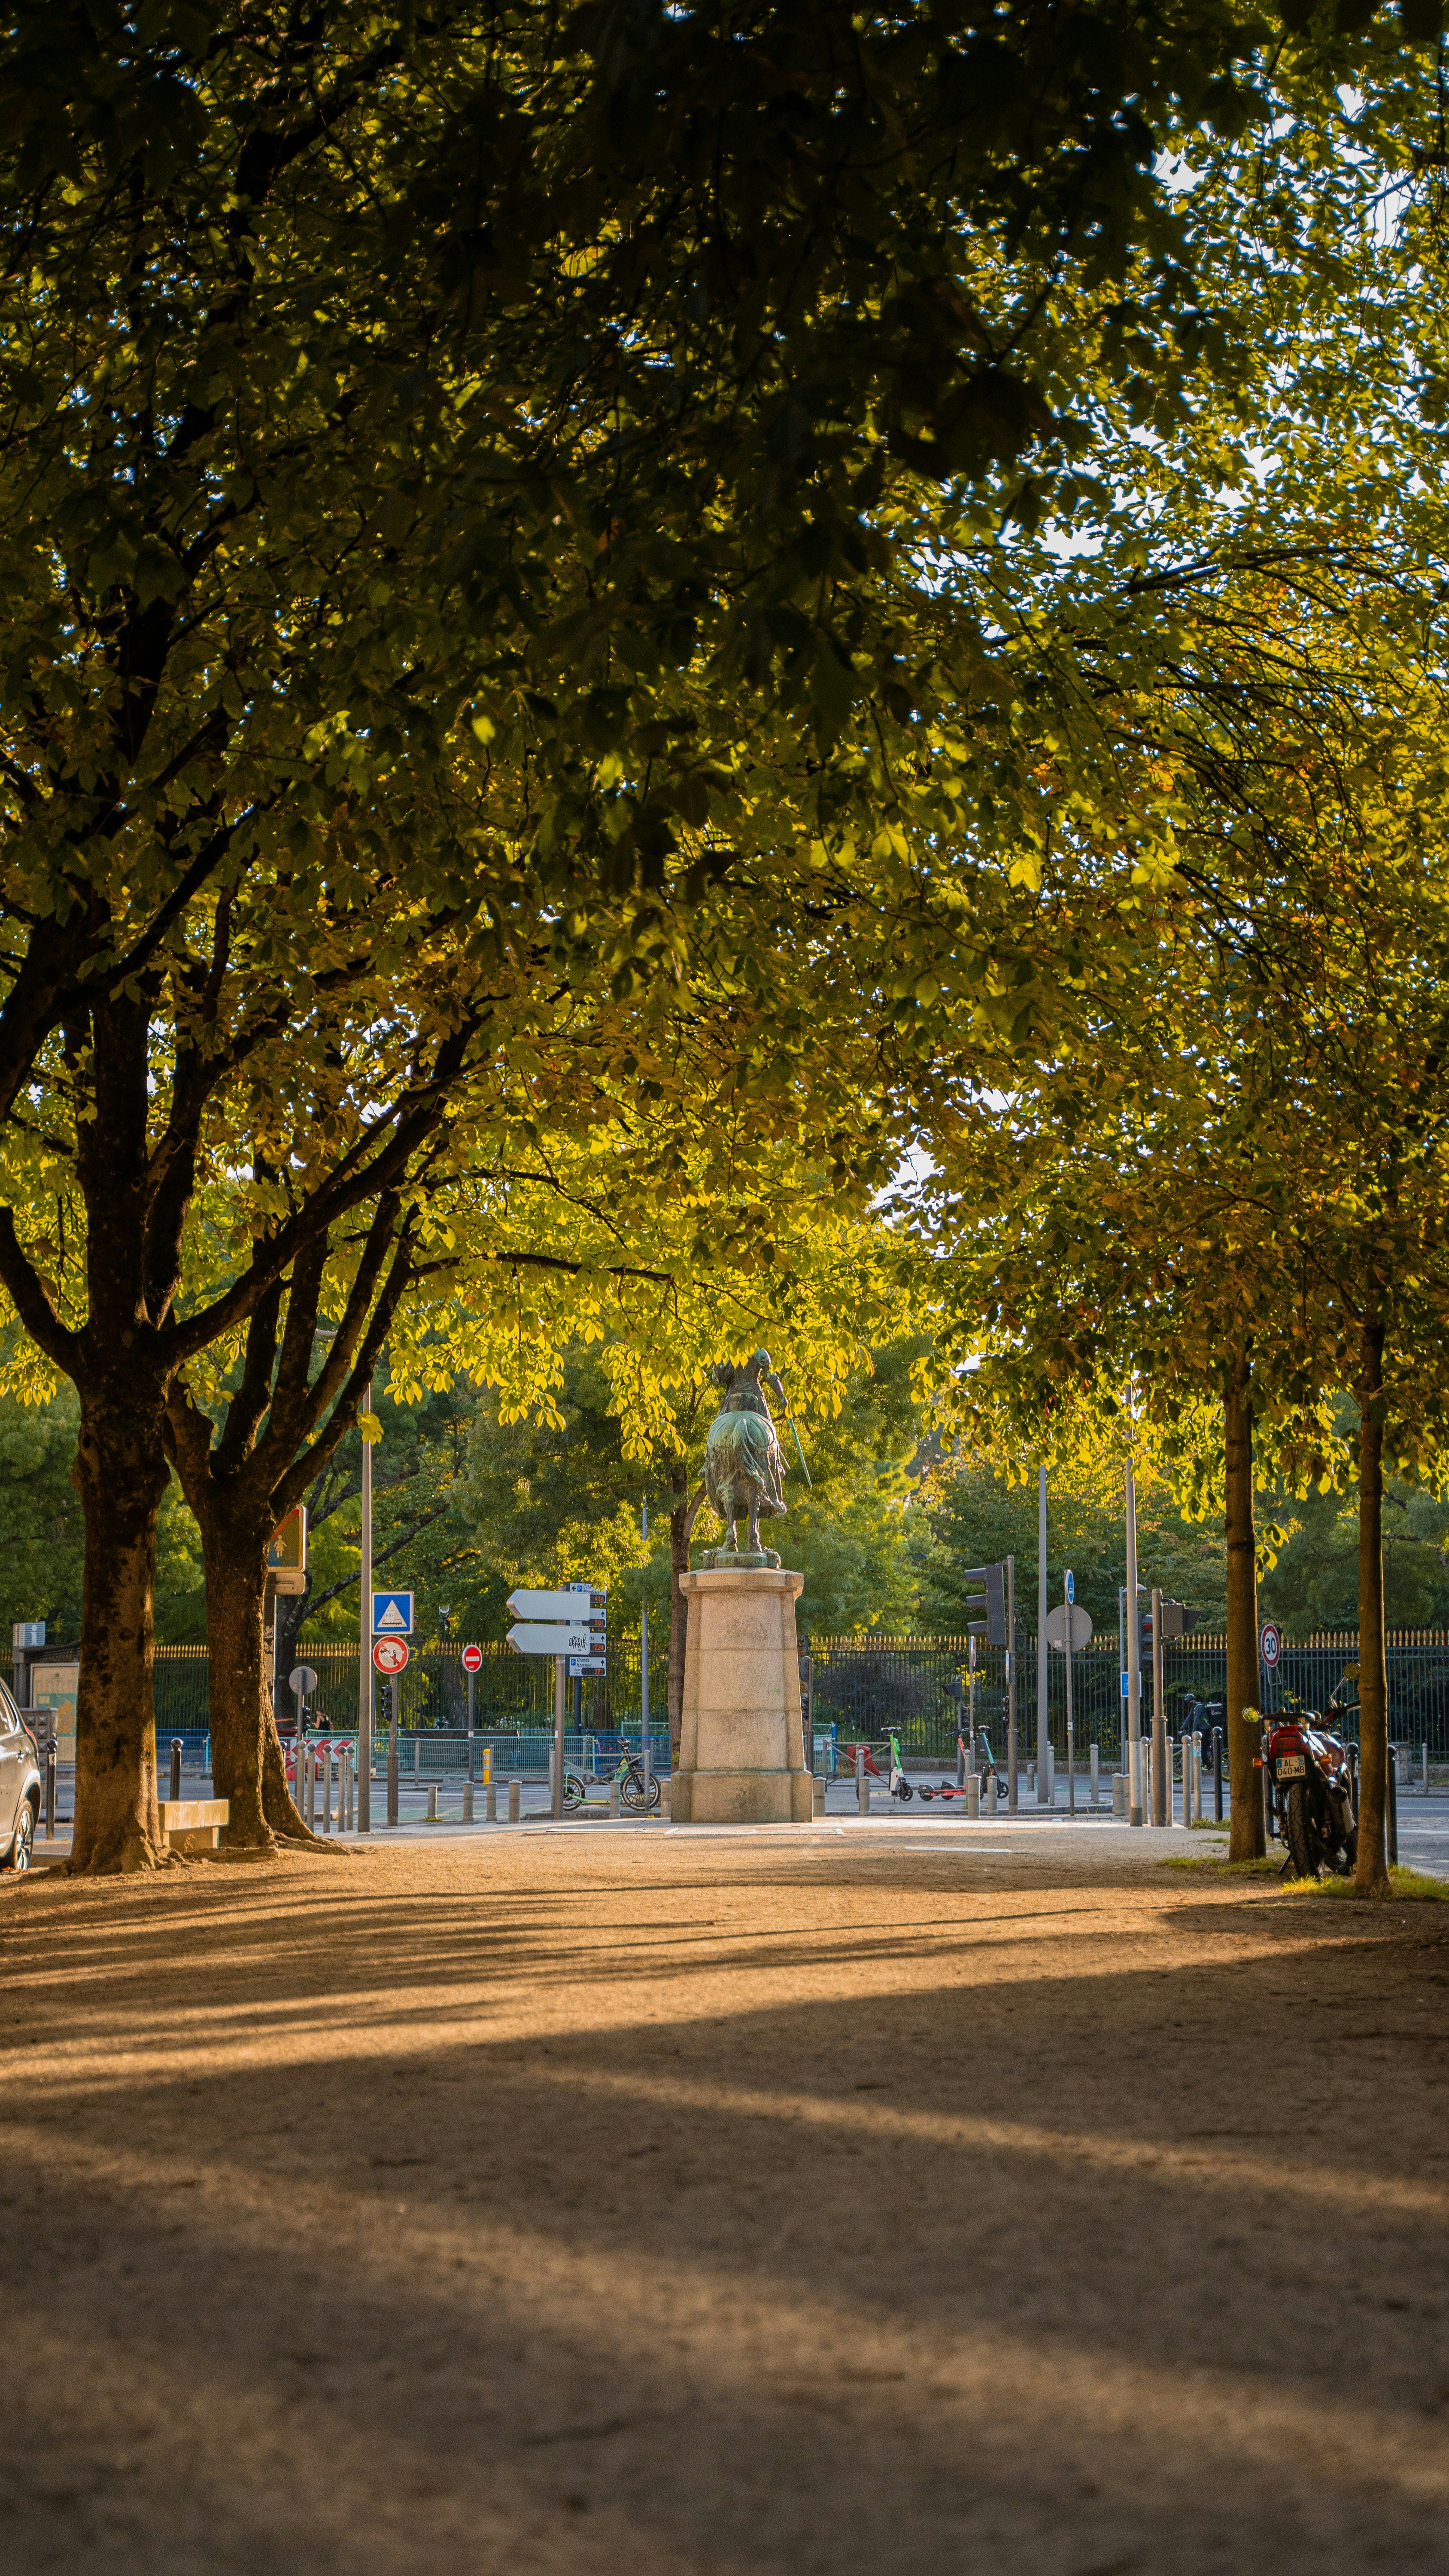 people walking on park with trees and statue during daytime